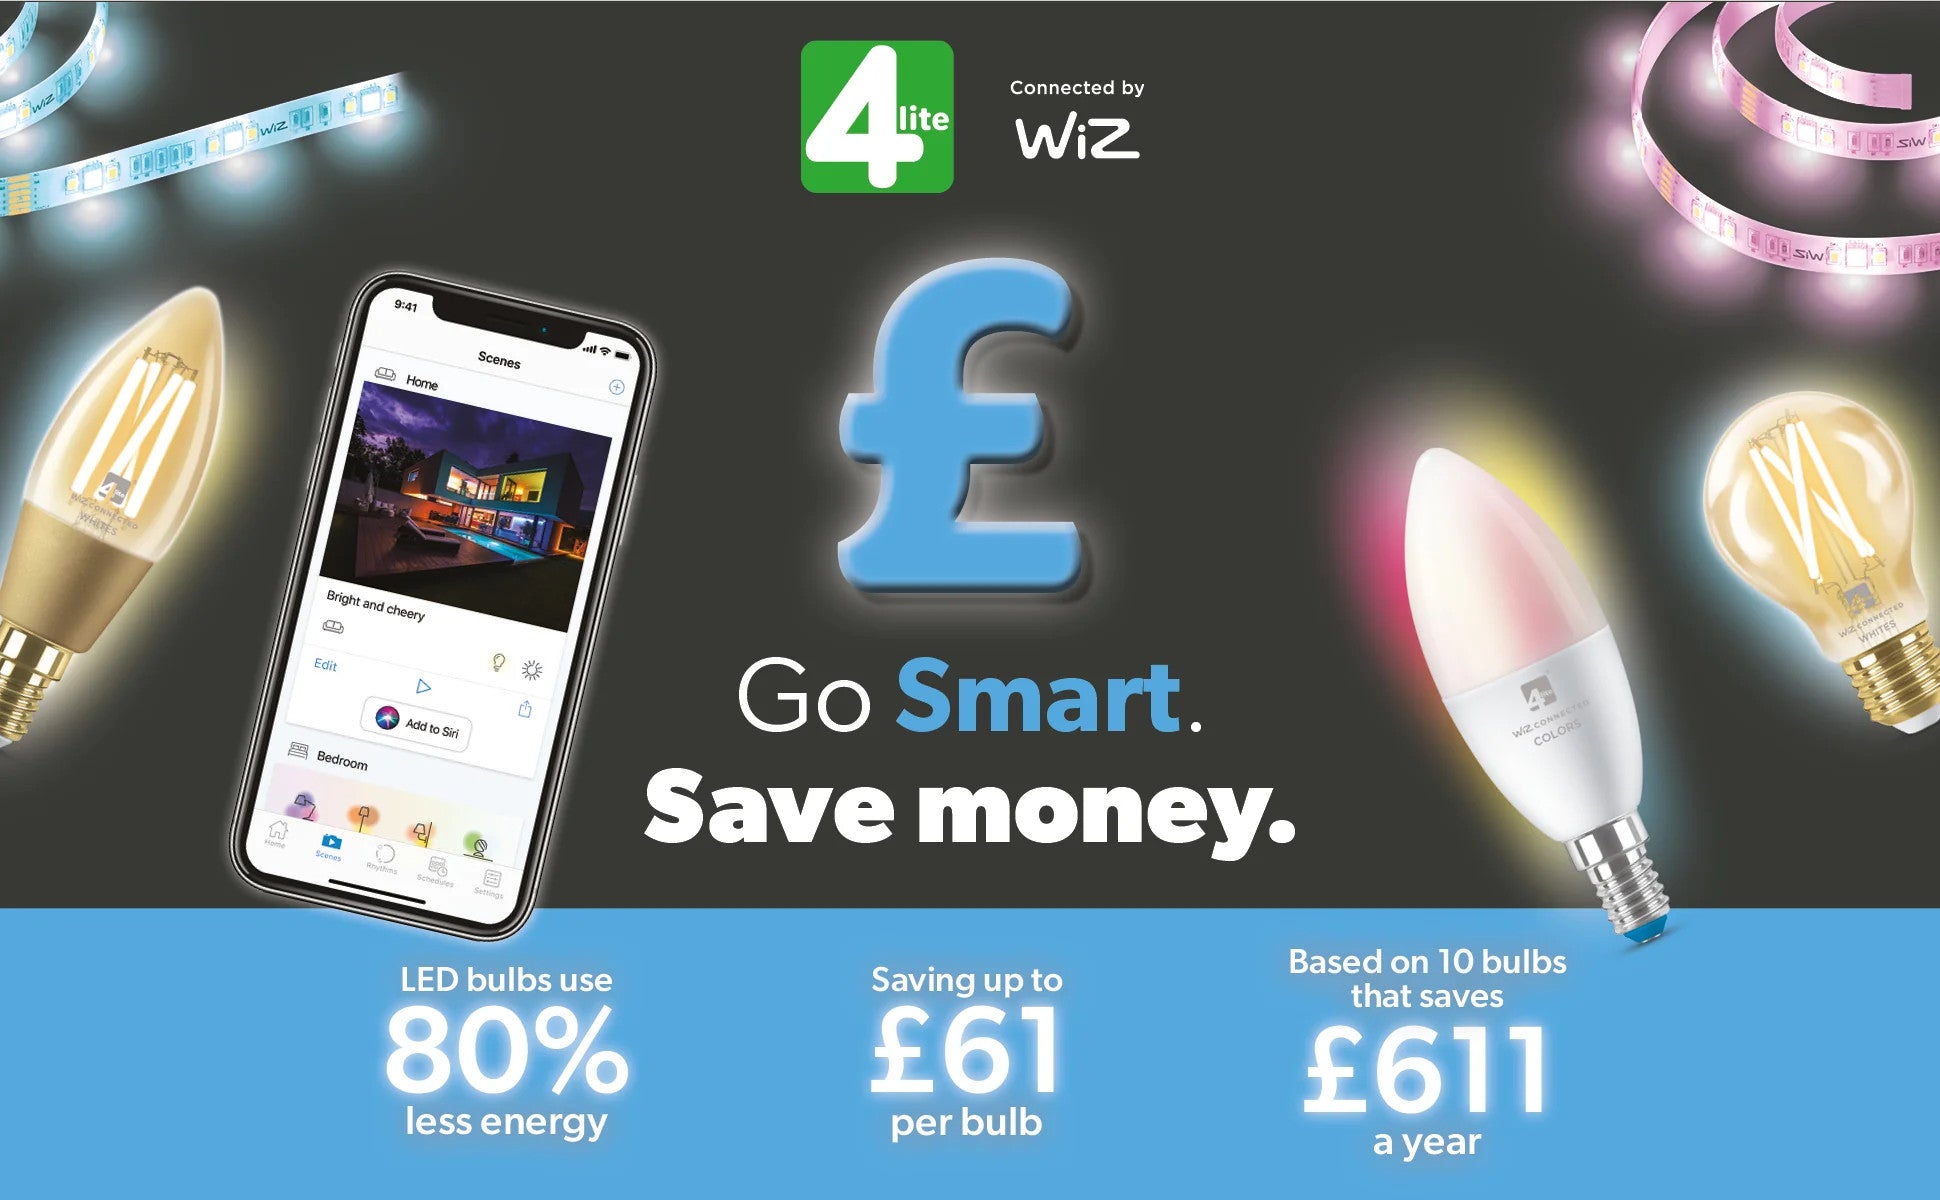 Go smart and save money with our Smart Lighting Deals on 4lite WiZ Connected Lightbulbs, Indoor Lighting, Outdoor Lighting, Smart plugs, sensors and more with our Black Friday offers!